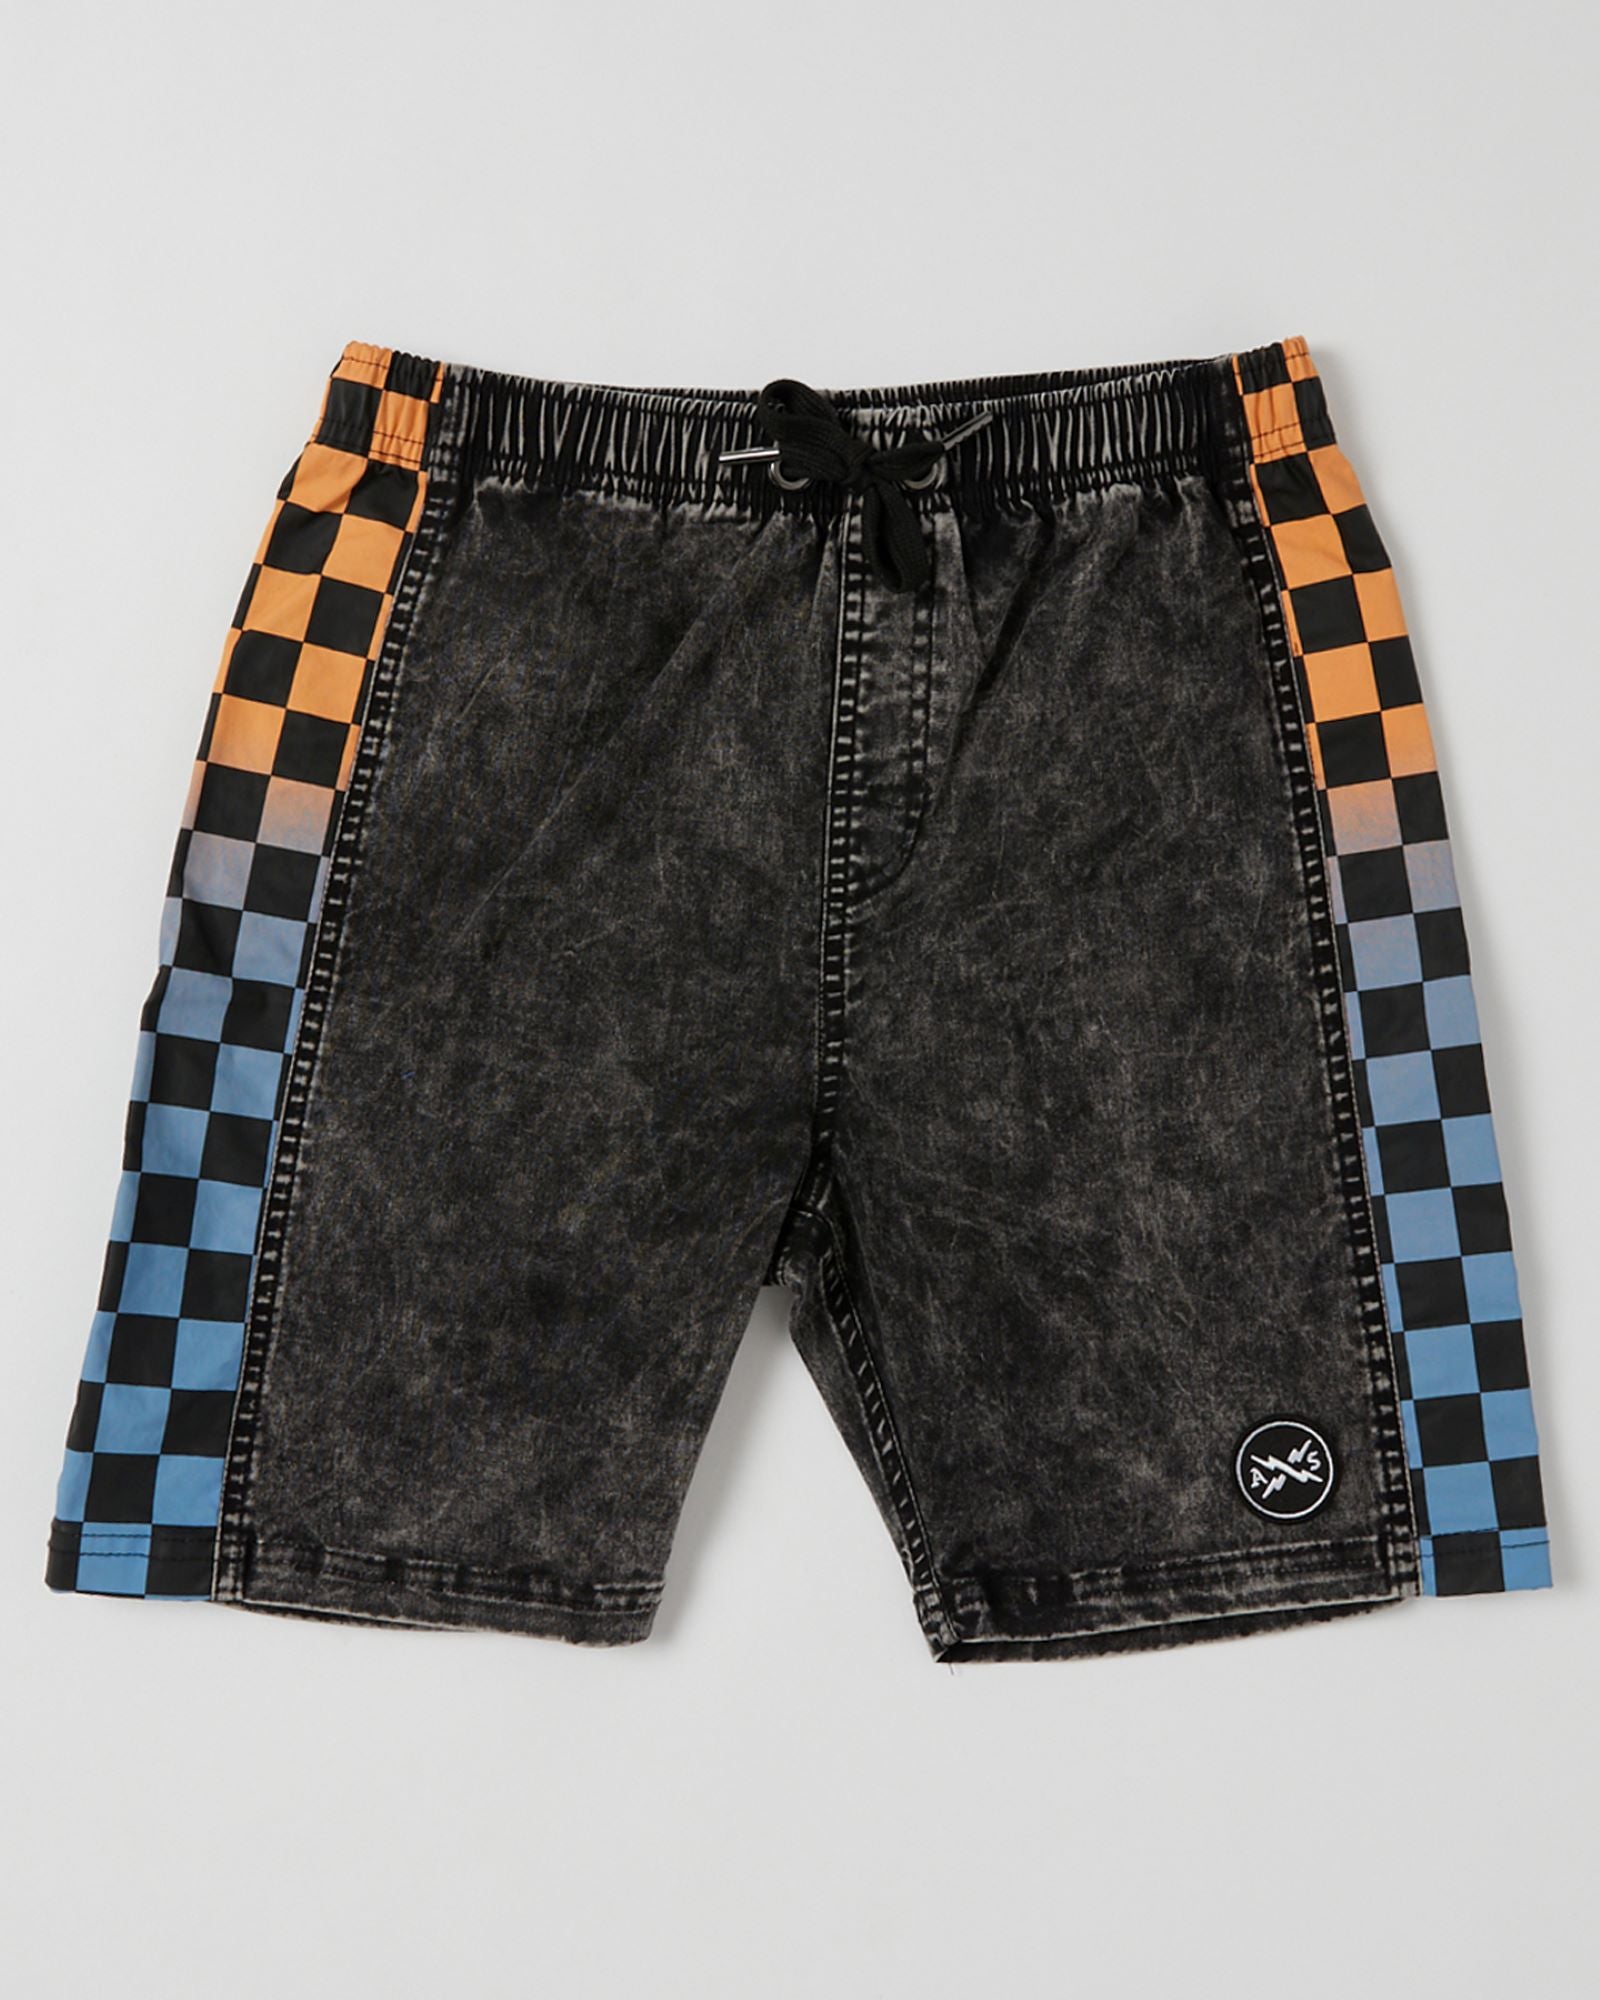 Alphabet Soup's Kids Check Mate Short for boys aged 2 to 7 offers an elastic waistband, adjustable drawstring, faux fly, and single back pocket with checkered panel detail.